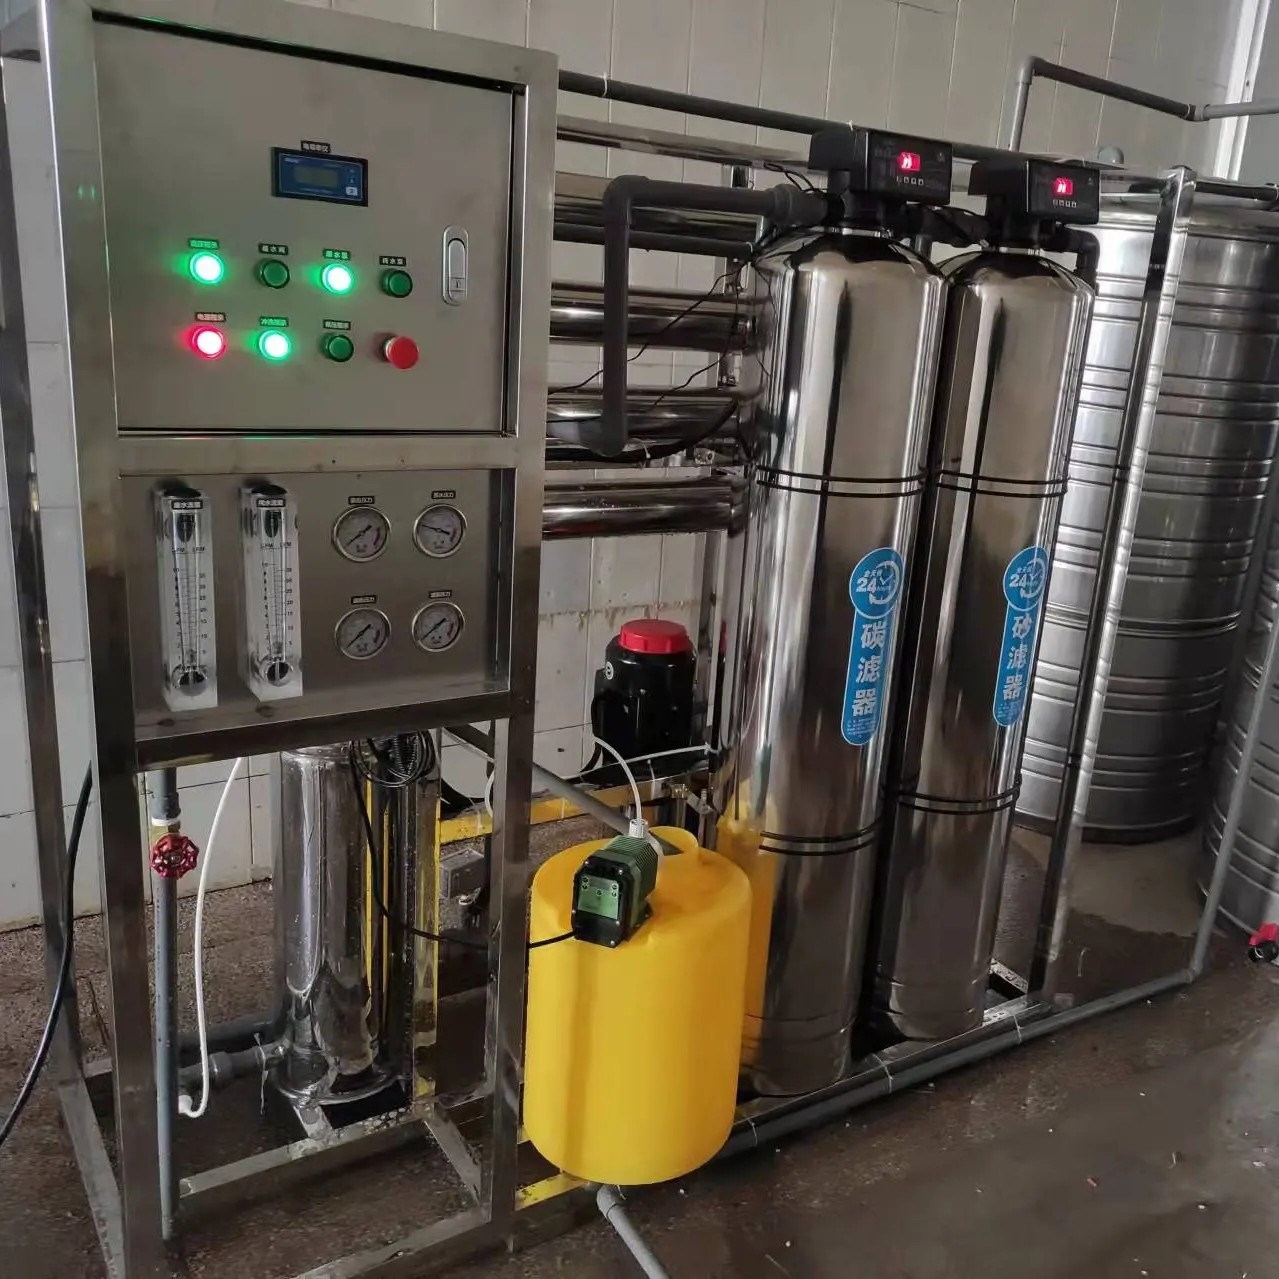 500 l 1000 l per hour water softener system home reverse osmosis well water filter system 500 lph ro system for drinking water